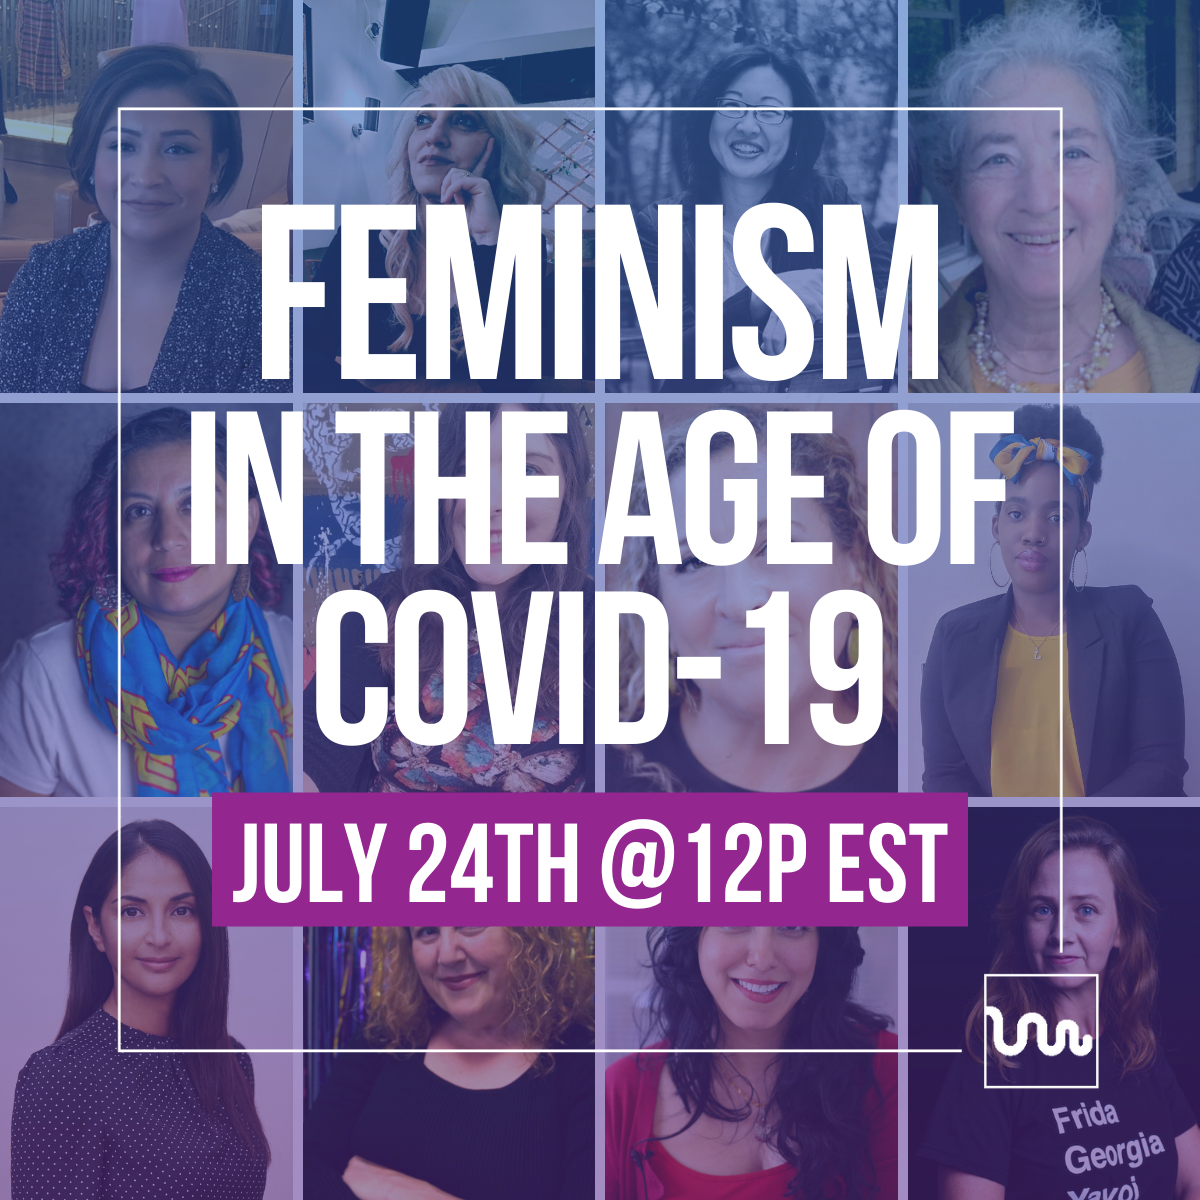 Grid of 12 women''s faces with superimposed text: "Feminism in the age of Covid-19. July 24th @12EST